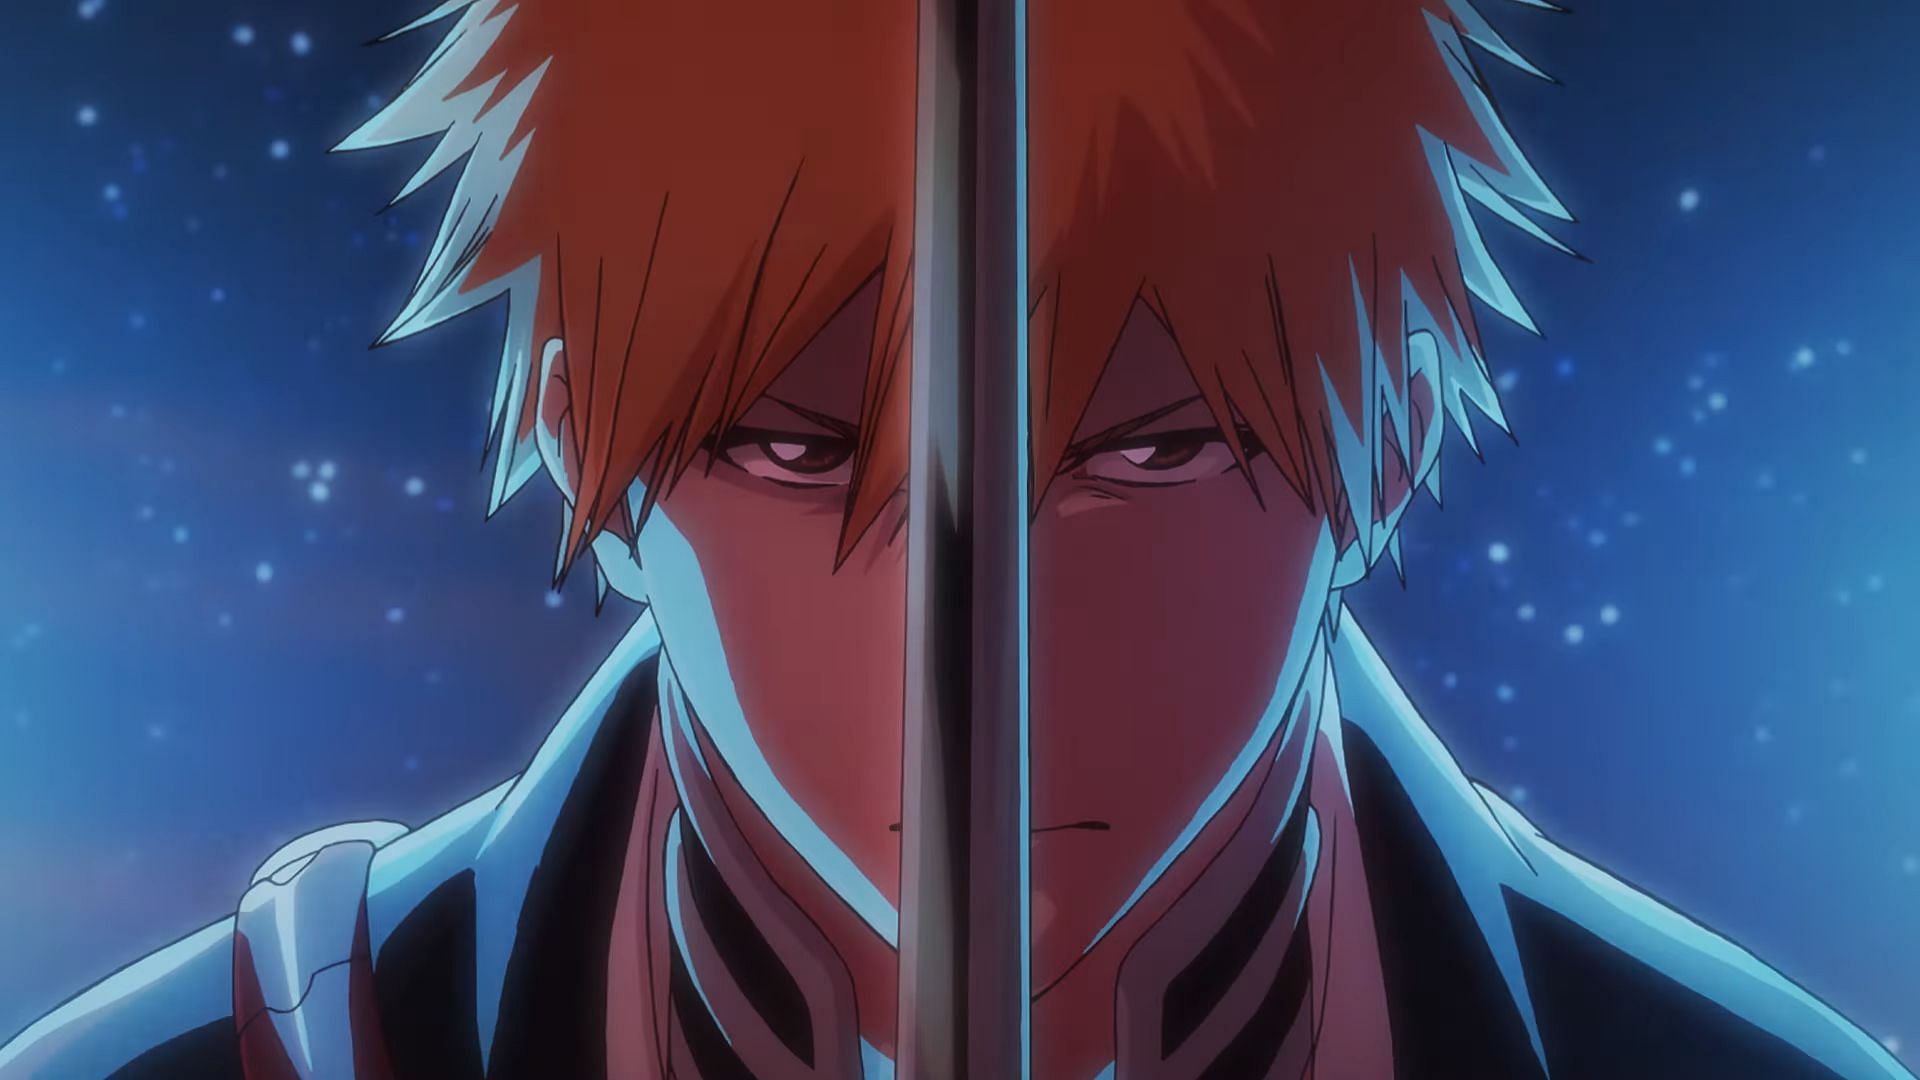 The first episode of Bleach: Thousand Year Blood War kicked off on a high and left fans wanting more as the second is scheduled to release on October 18, 2022 (Image via Studio Pierrot)